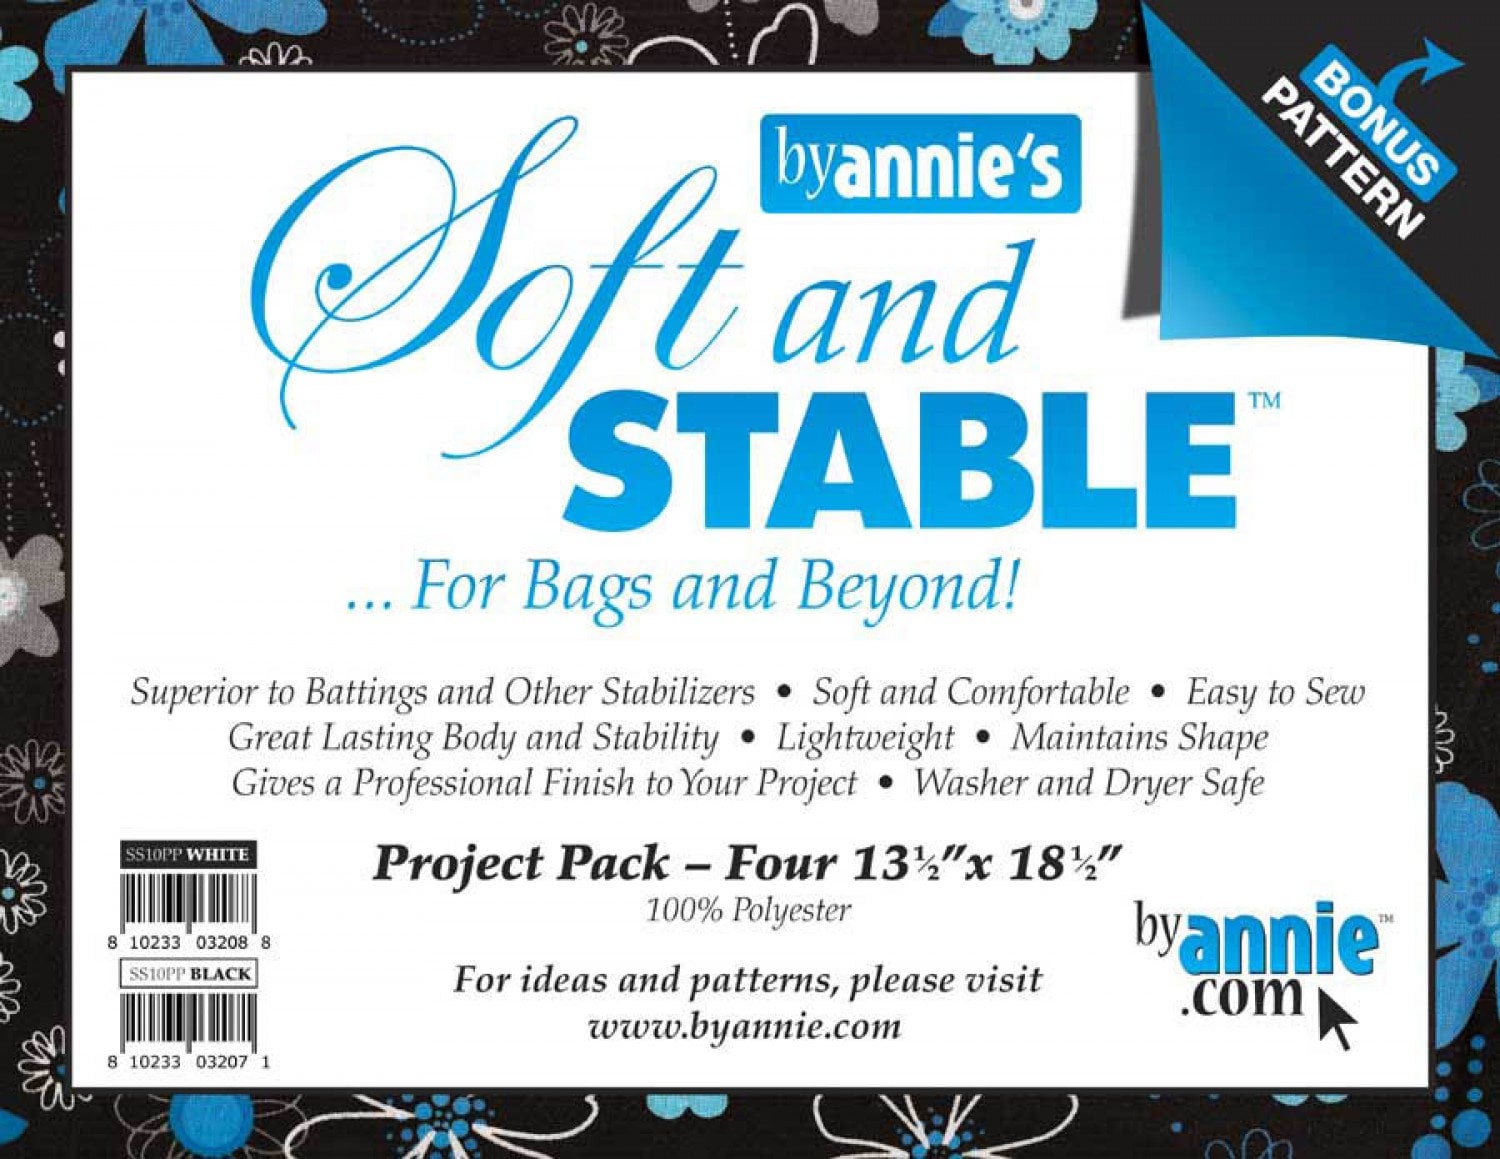 110 ByAnnie's Soft and Stable ideas